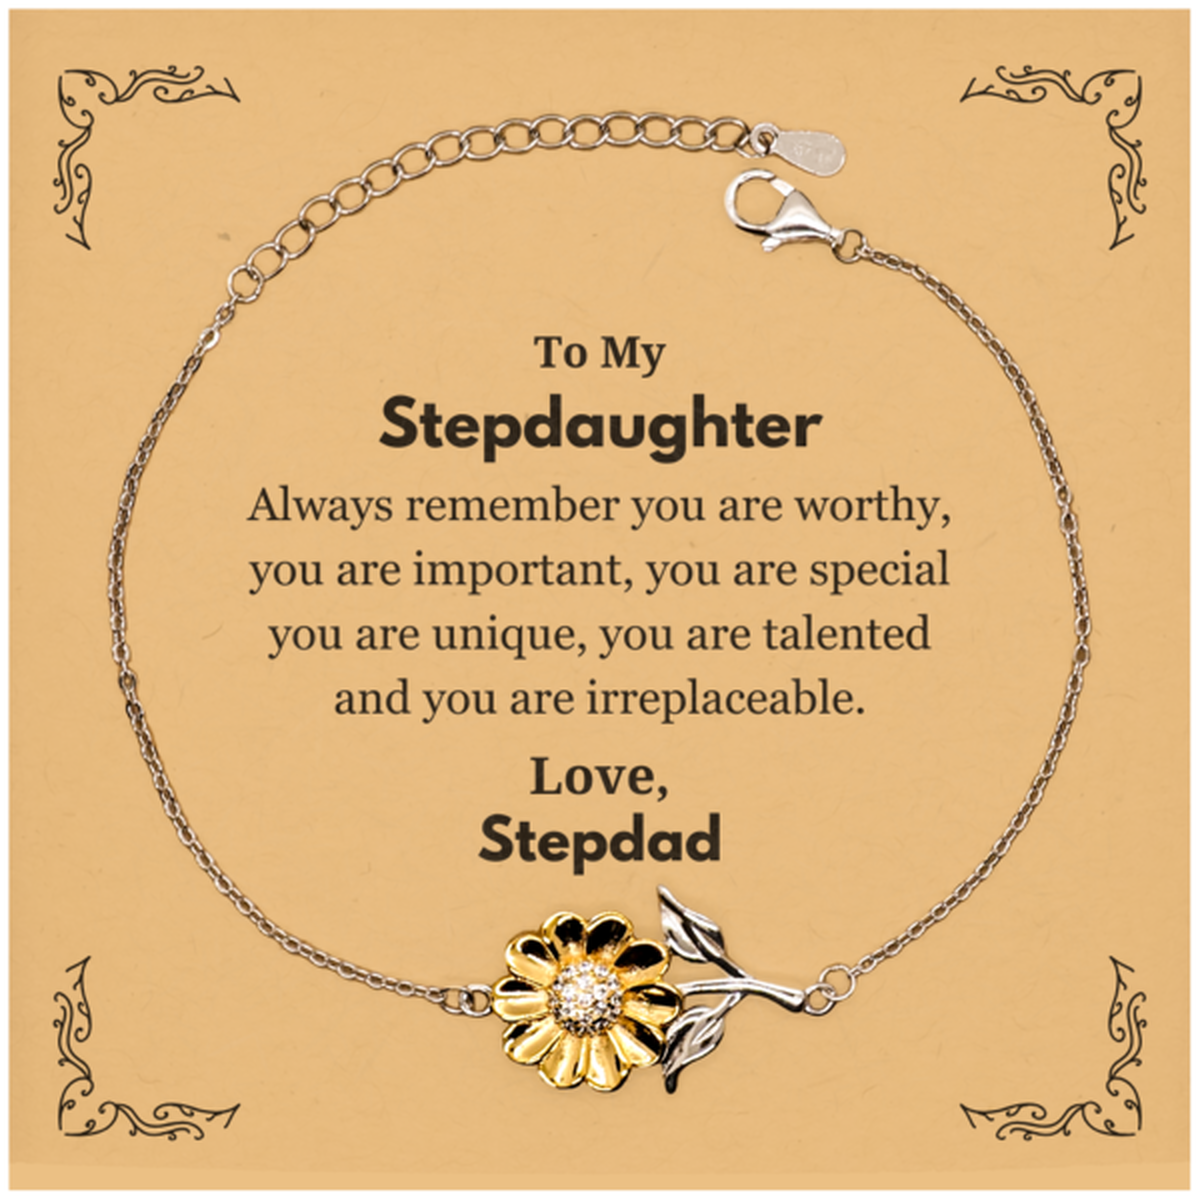 Stepdaughter Birthday Gifts from Stepdad, Inspirational Sunflower Bracelet for Stepdaughter Christmas Graduation Gifts for Stepdaughter Always remember you are worthy, you are important. Love, Stepdad